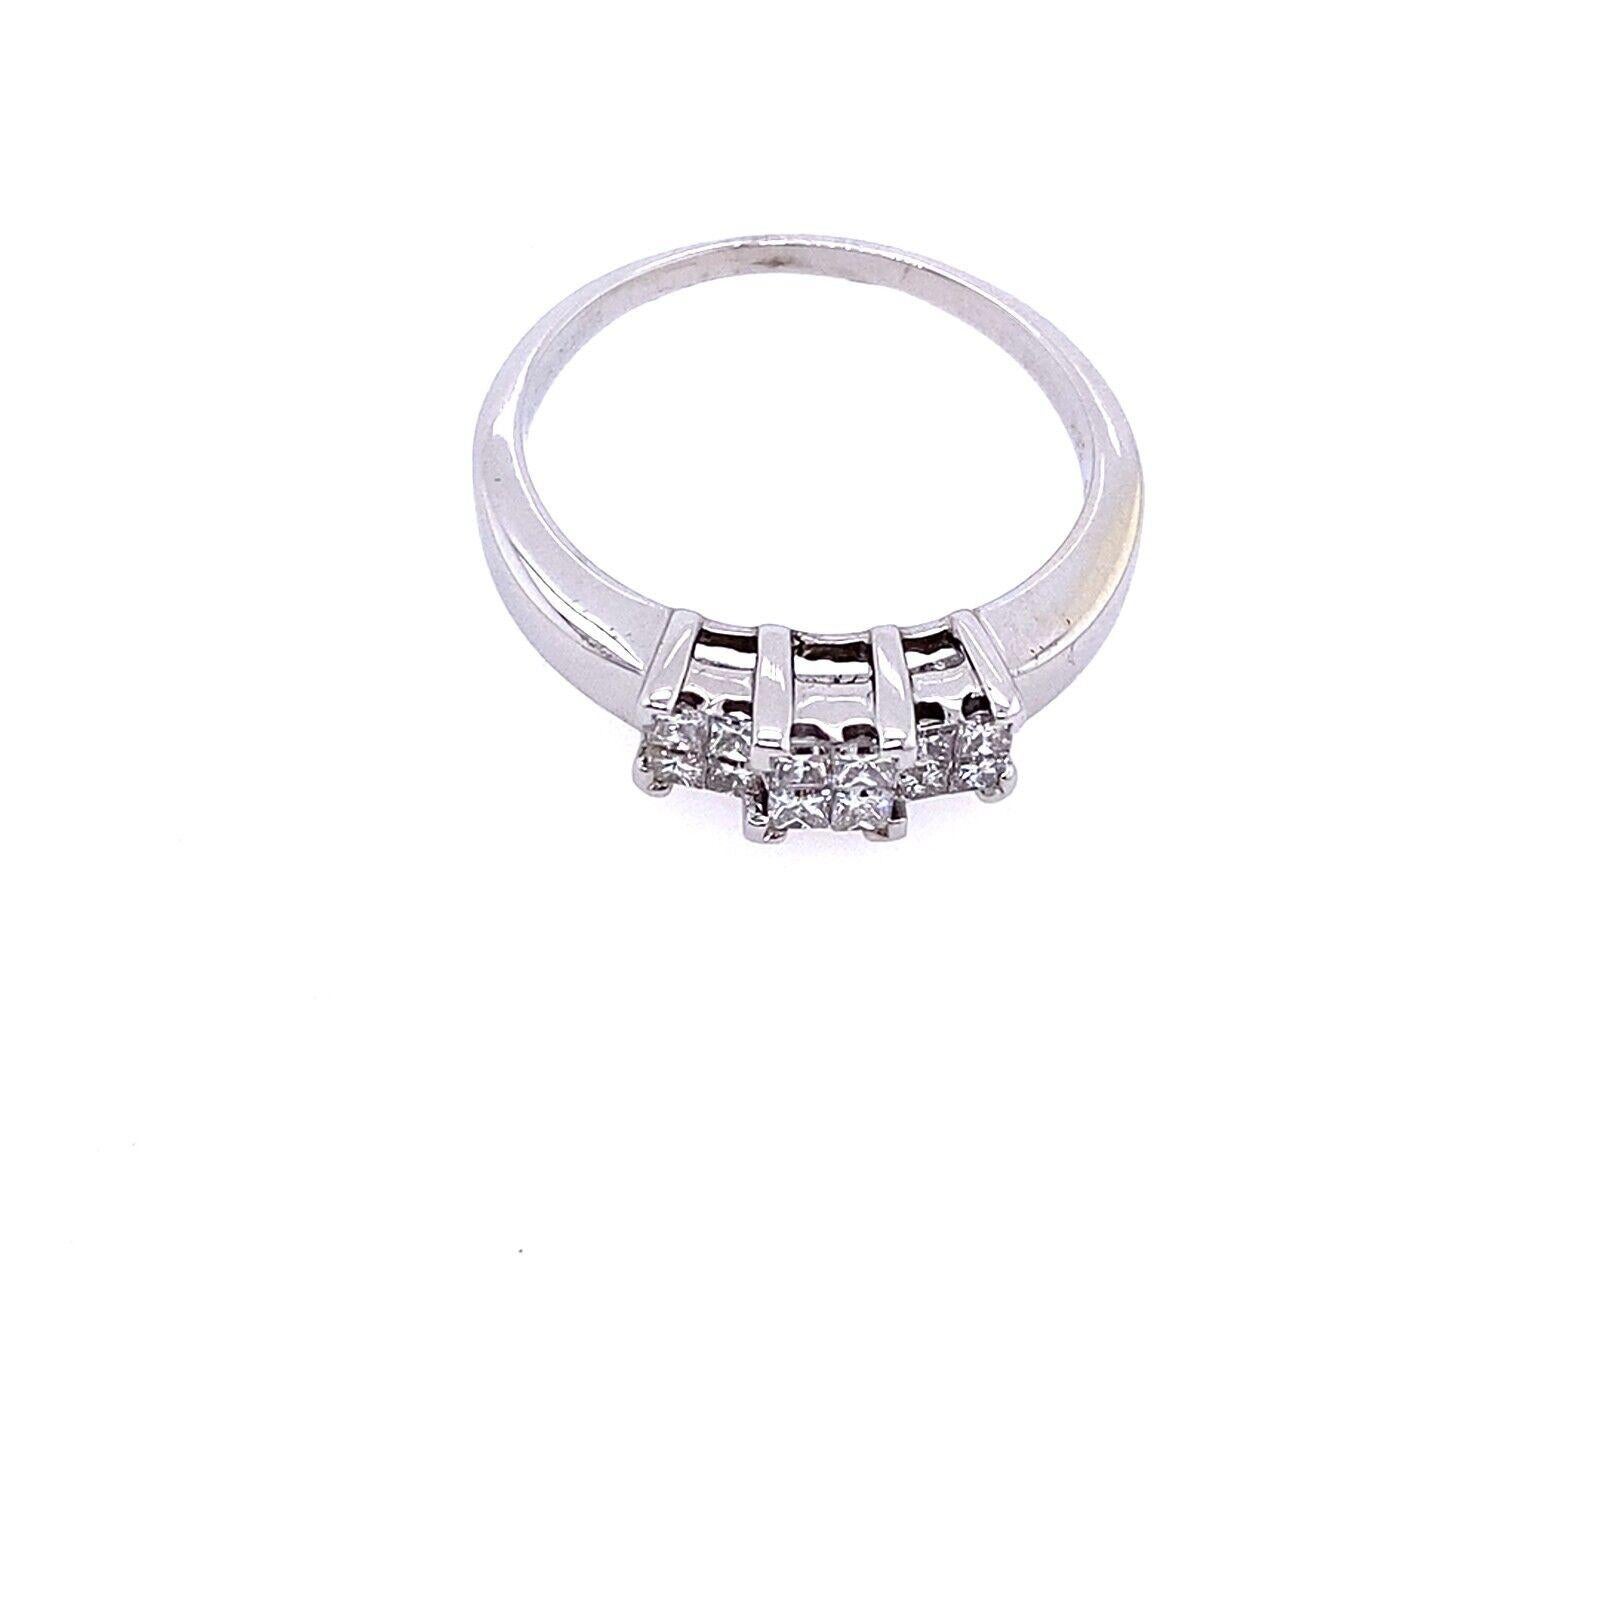 This trilogy ring features a cluster of 12 natural princess cut Diamonds in a classic setting, a stunning design that symbolizes love and friendship. The 0.50ct total Diamond weight shines with brilliance.

Additional Information: 
Total Diamond